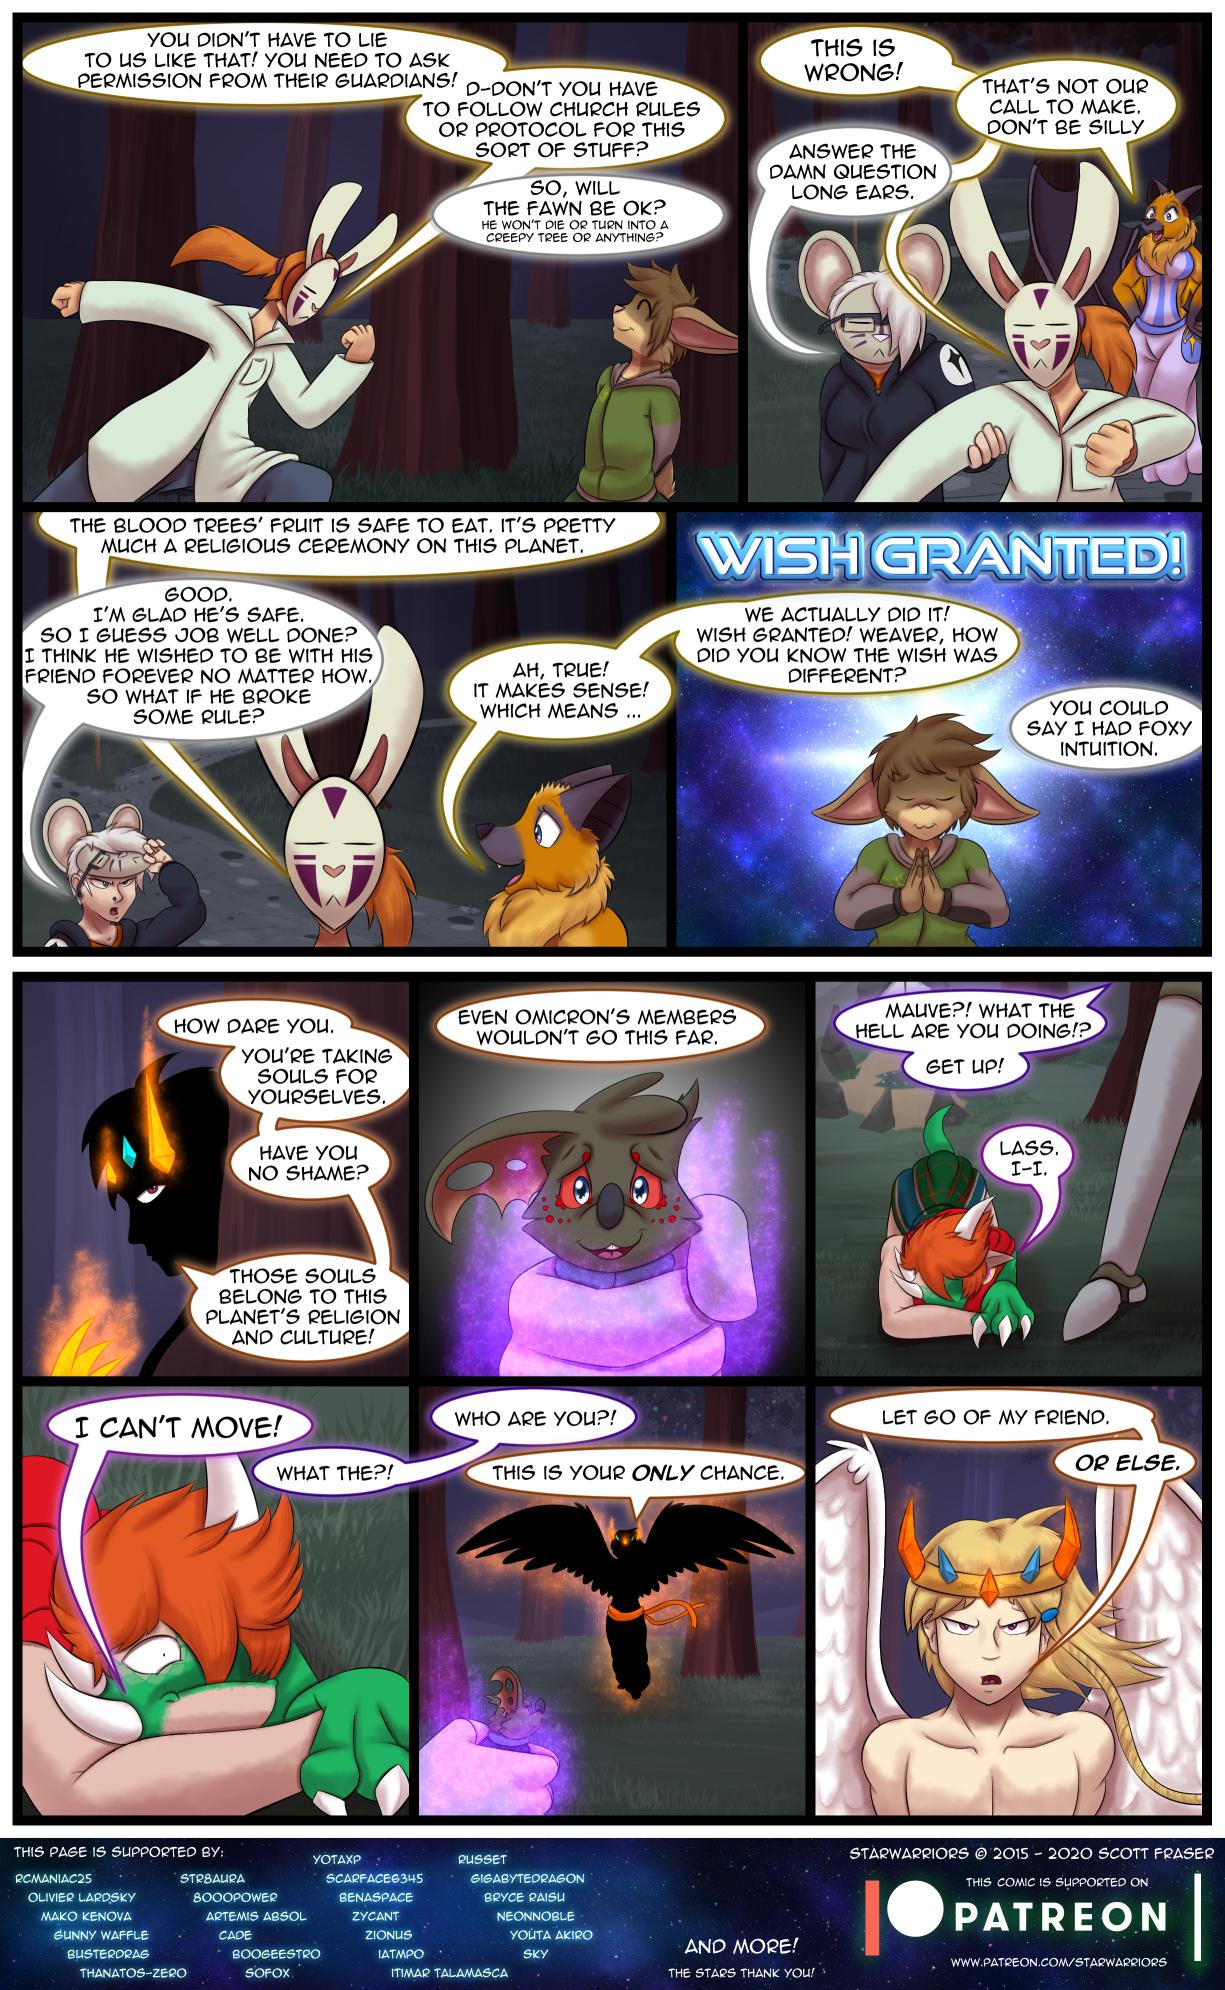 Ch5 Page 20 – Let go